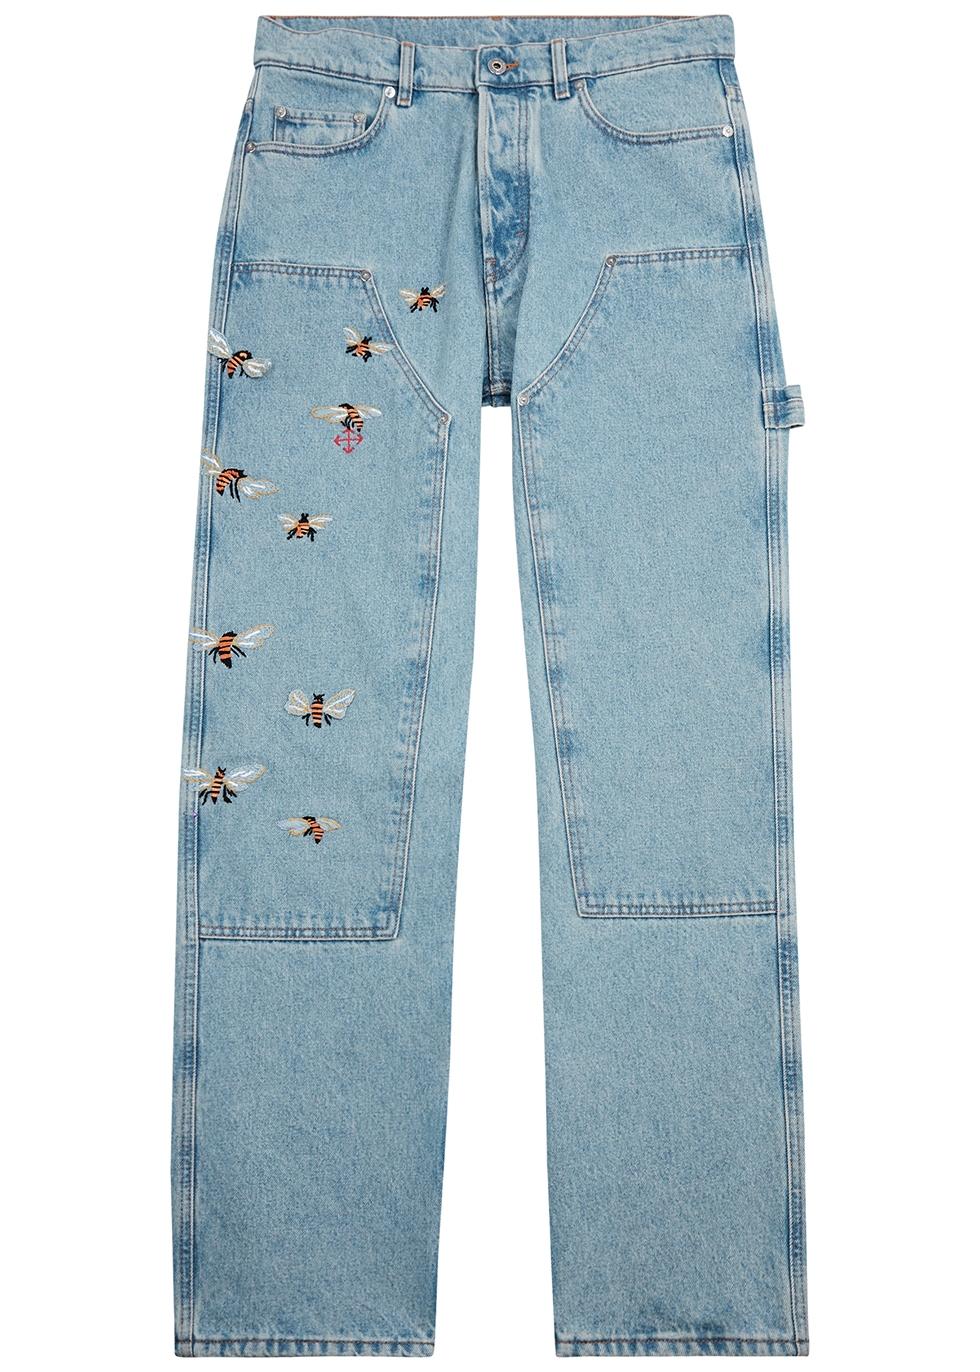 Off-White c/o Virgil Abloh Embroidered Jeans "Baggy" Floral Light  Wash (Size 25)